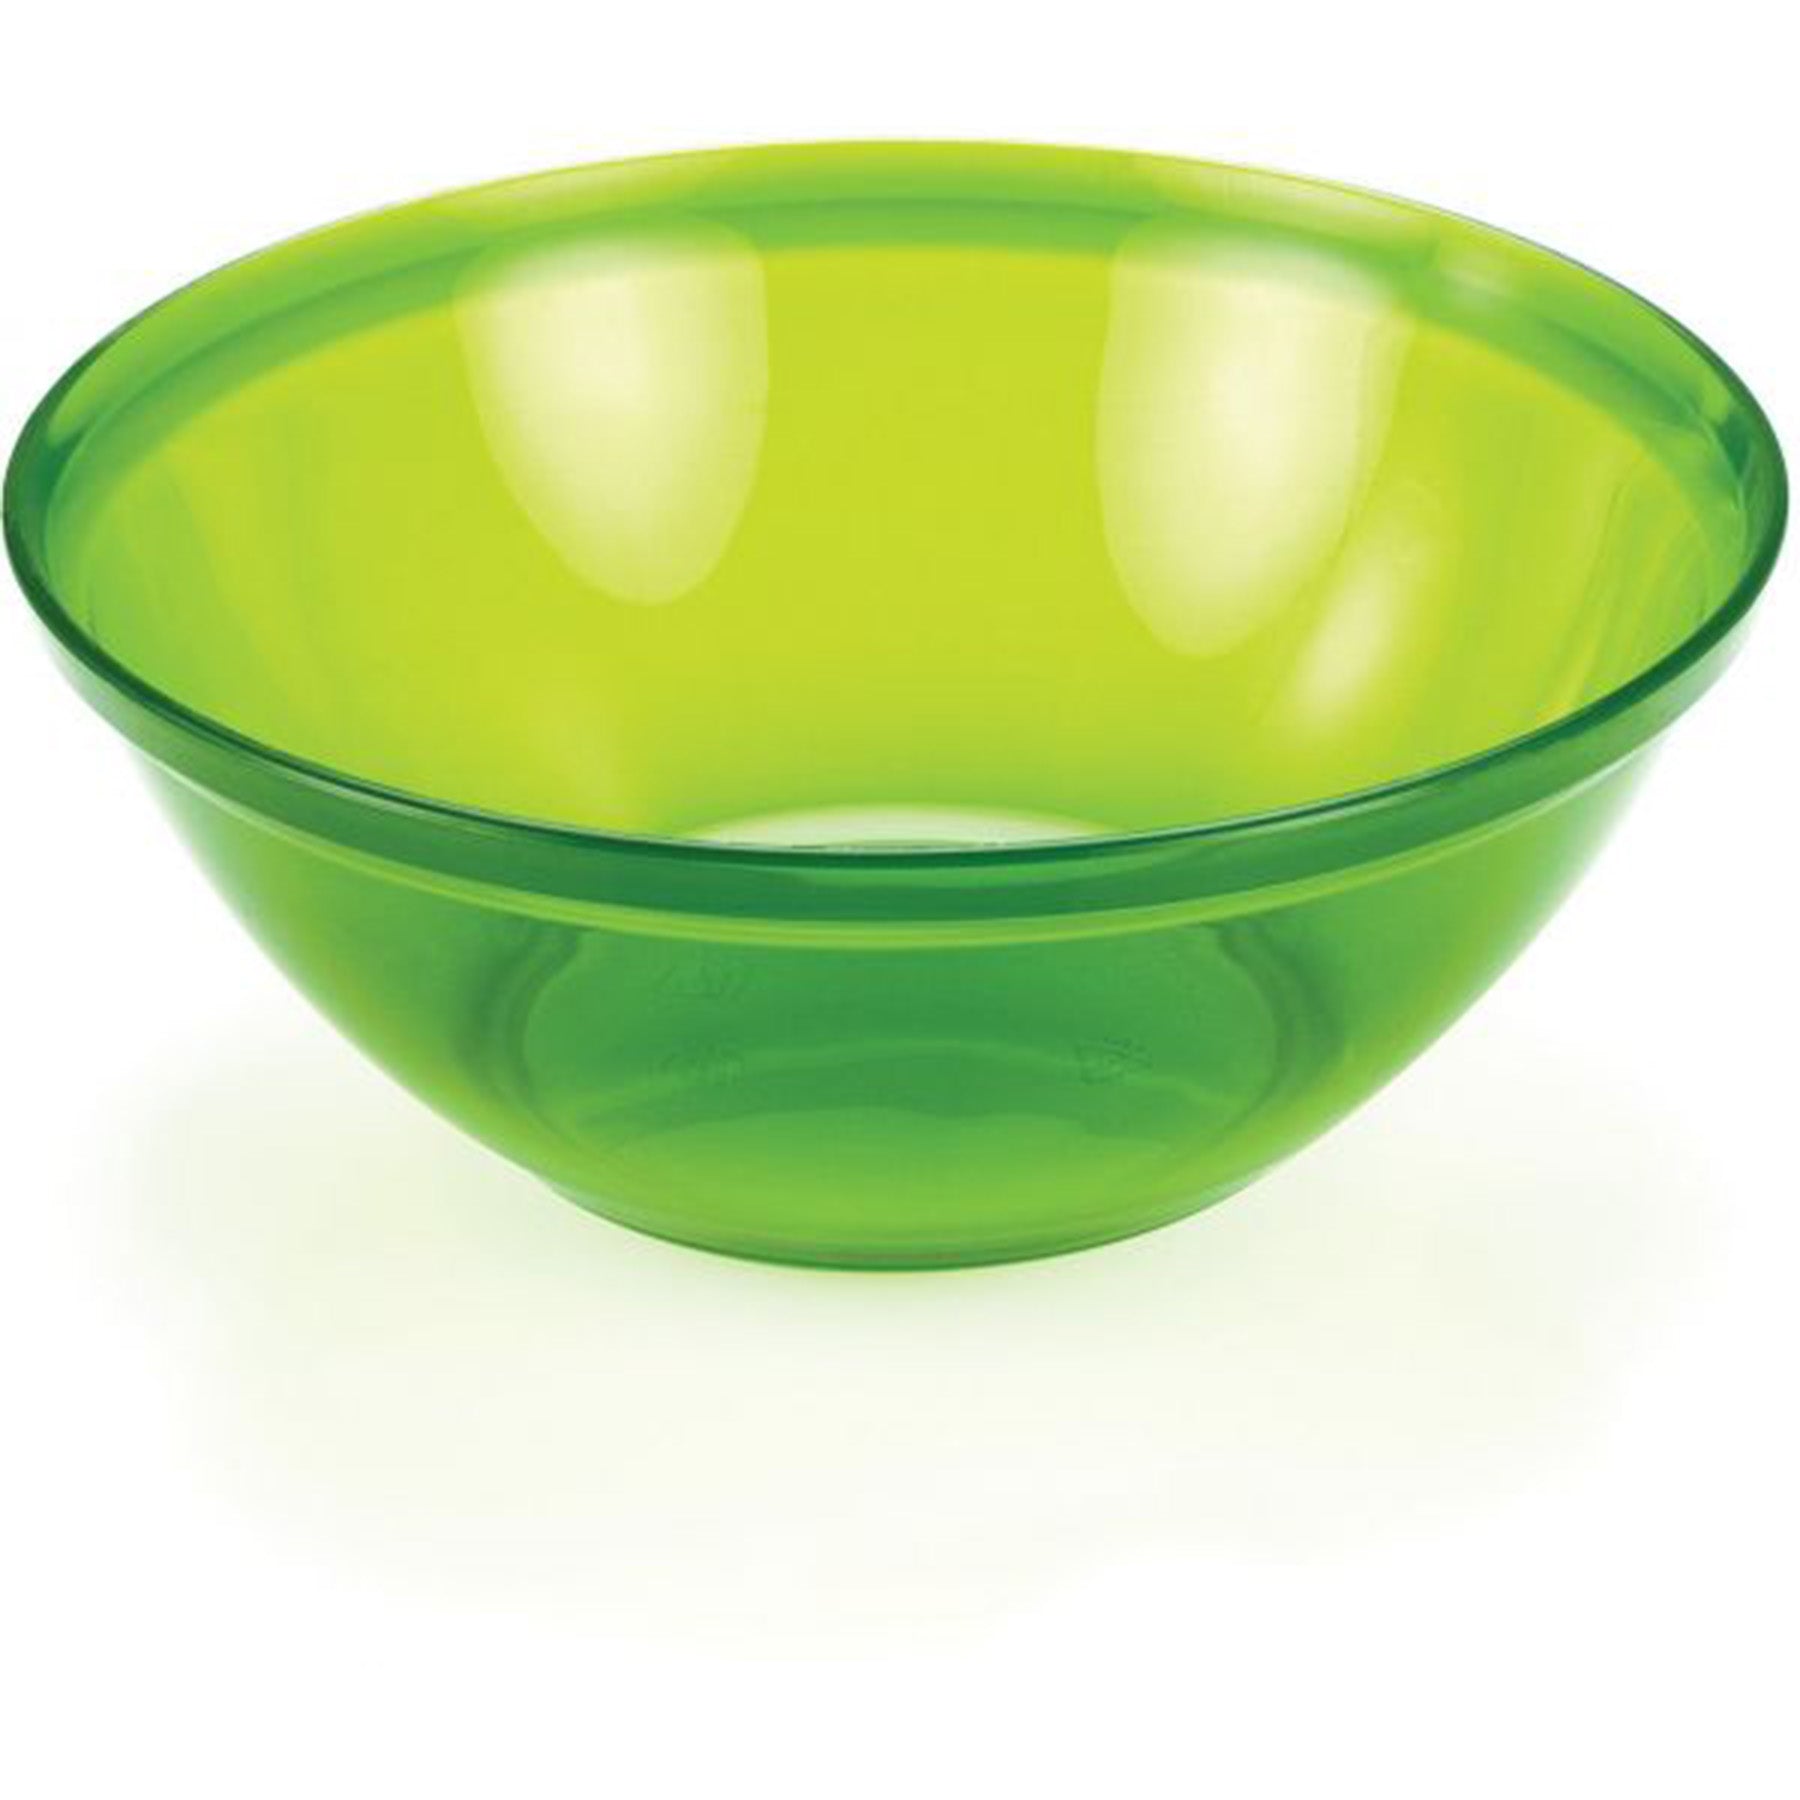 close up of the green lexan infinity bowl